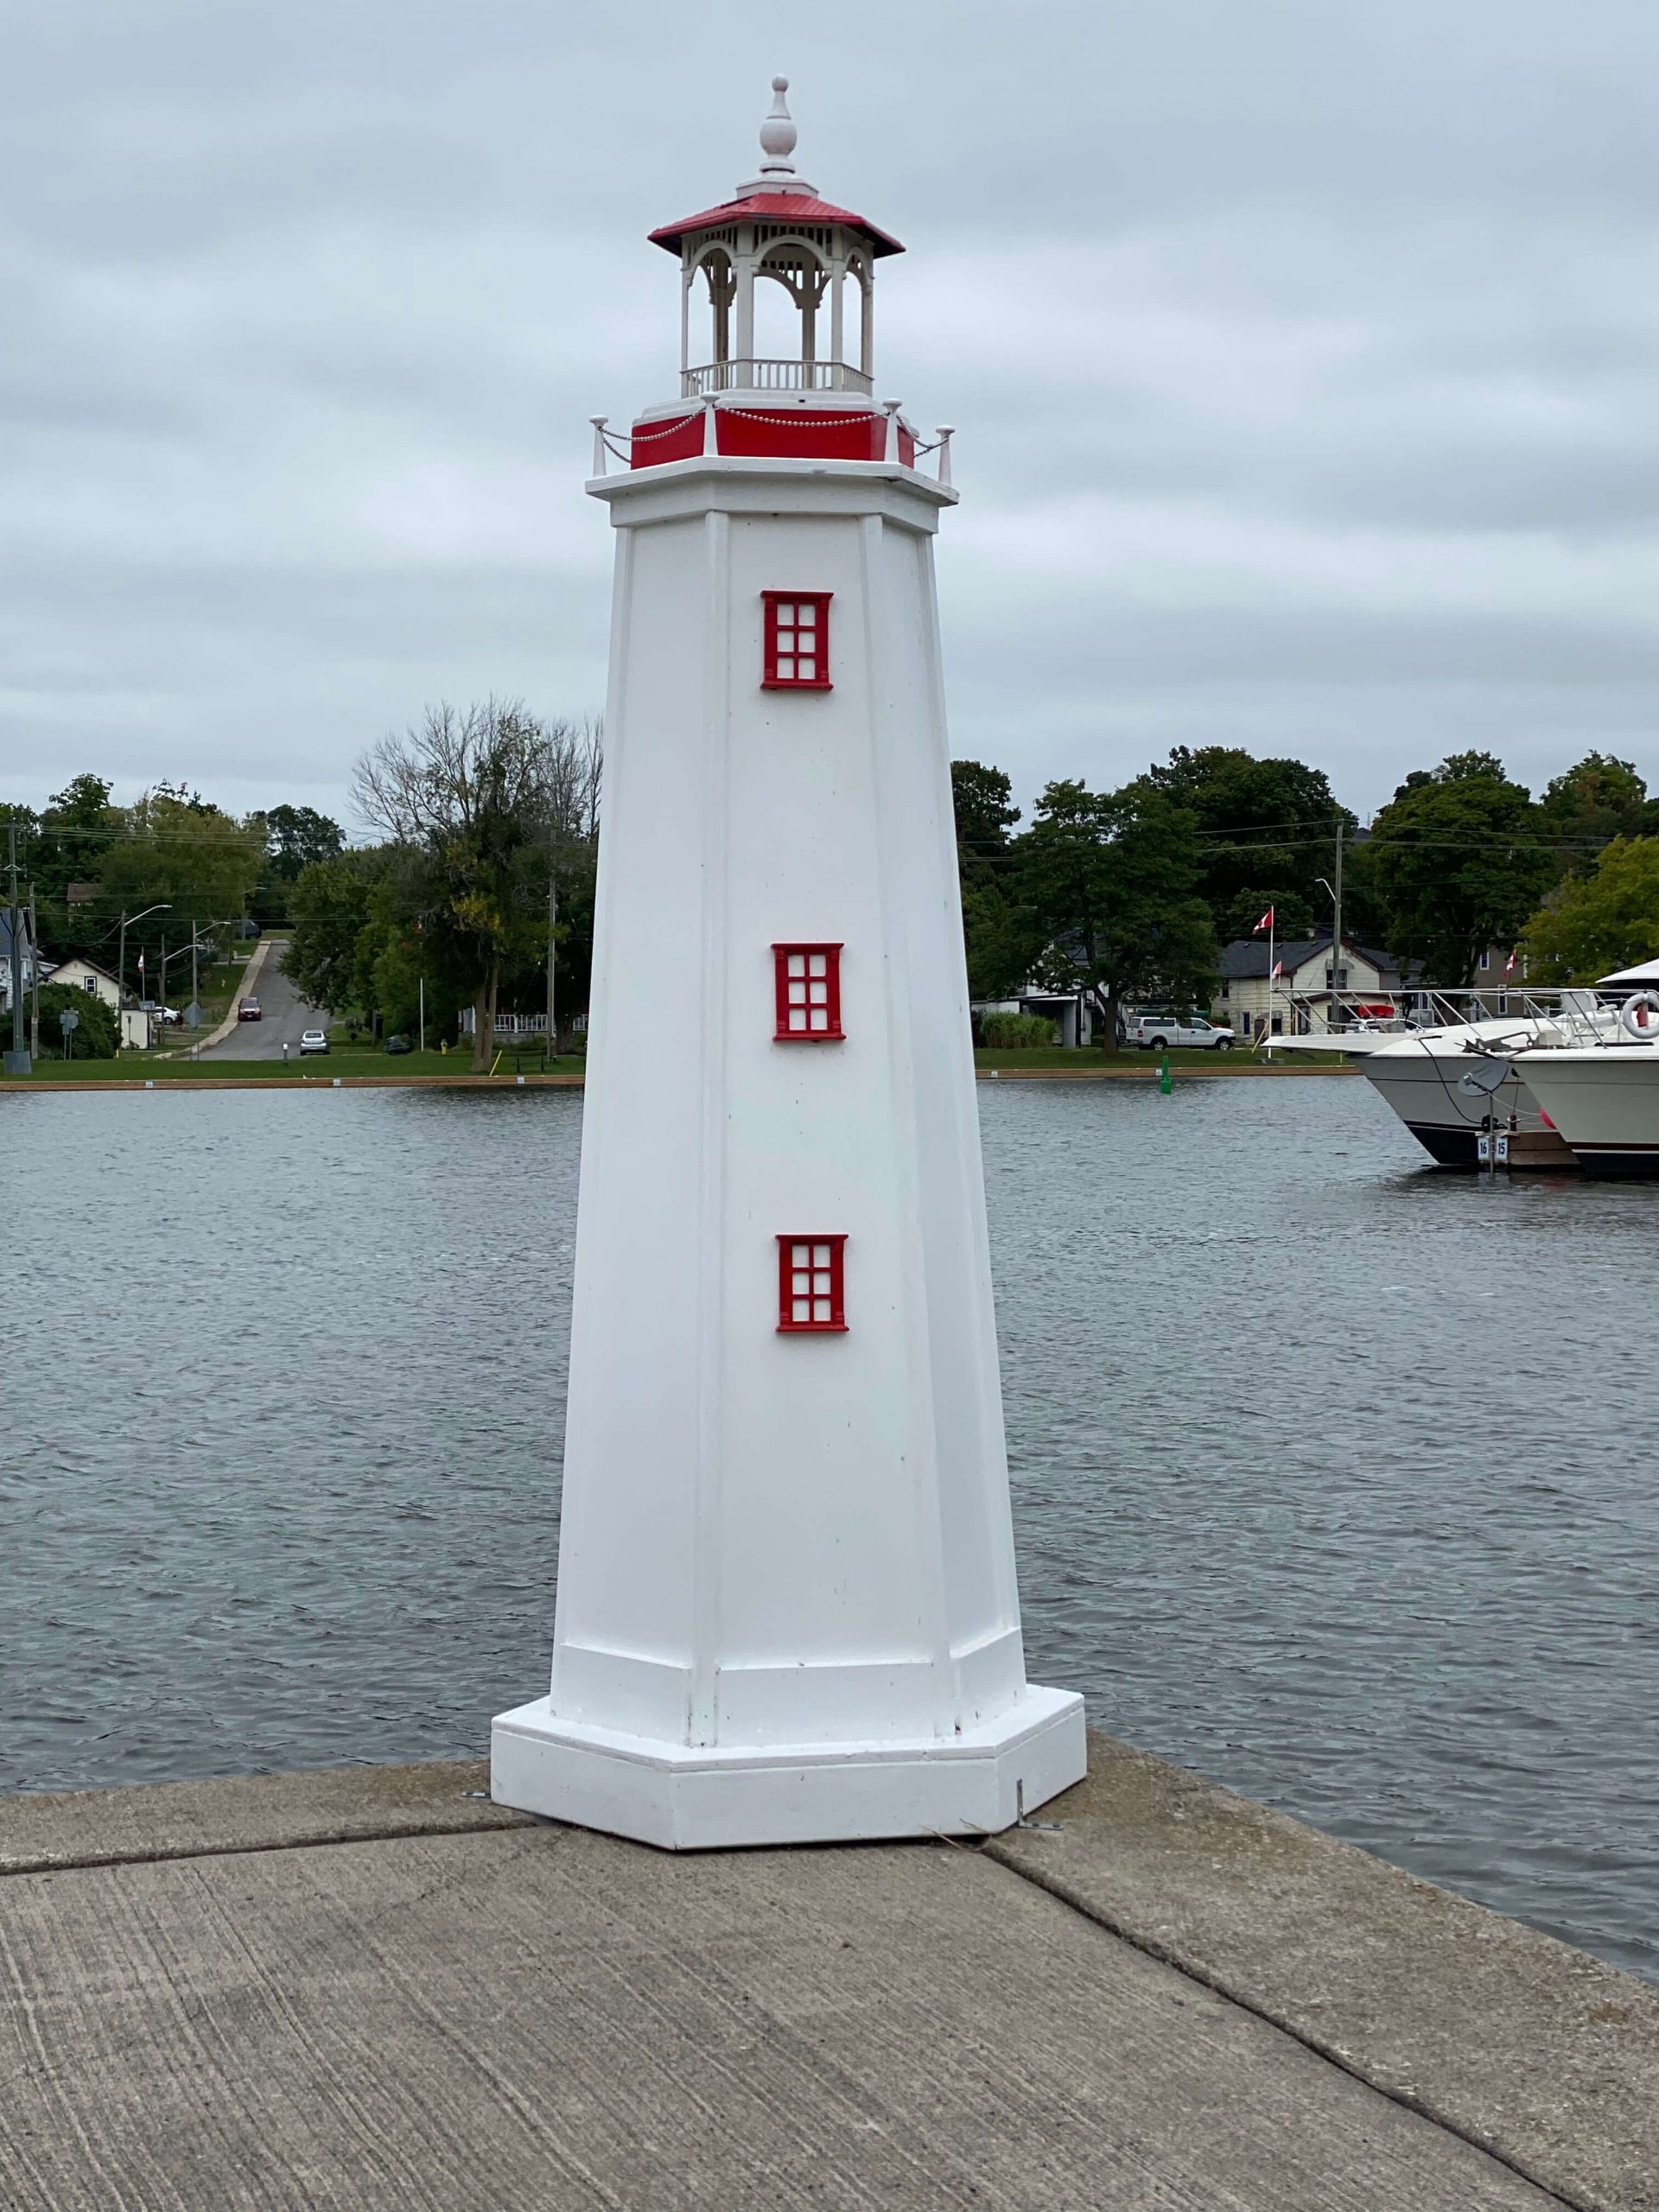 Hastings Marina's lighthouse on the Trent River is a ornament put in place for people, it is white with red window trim and is a minature lighthouse